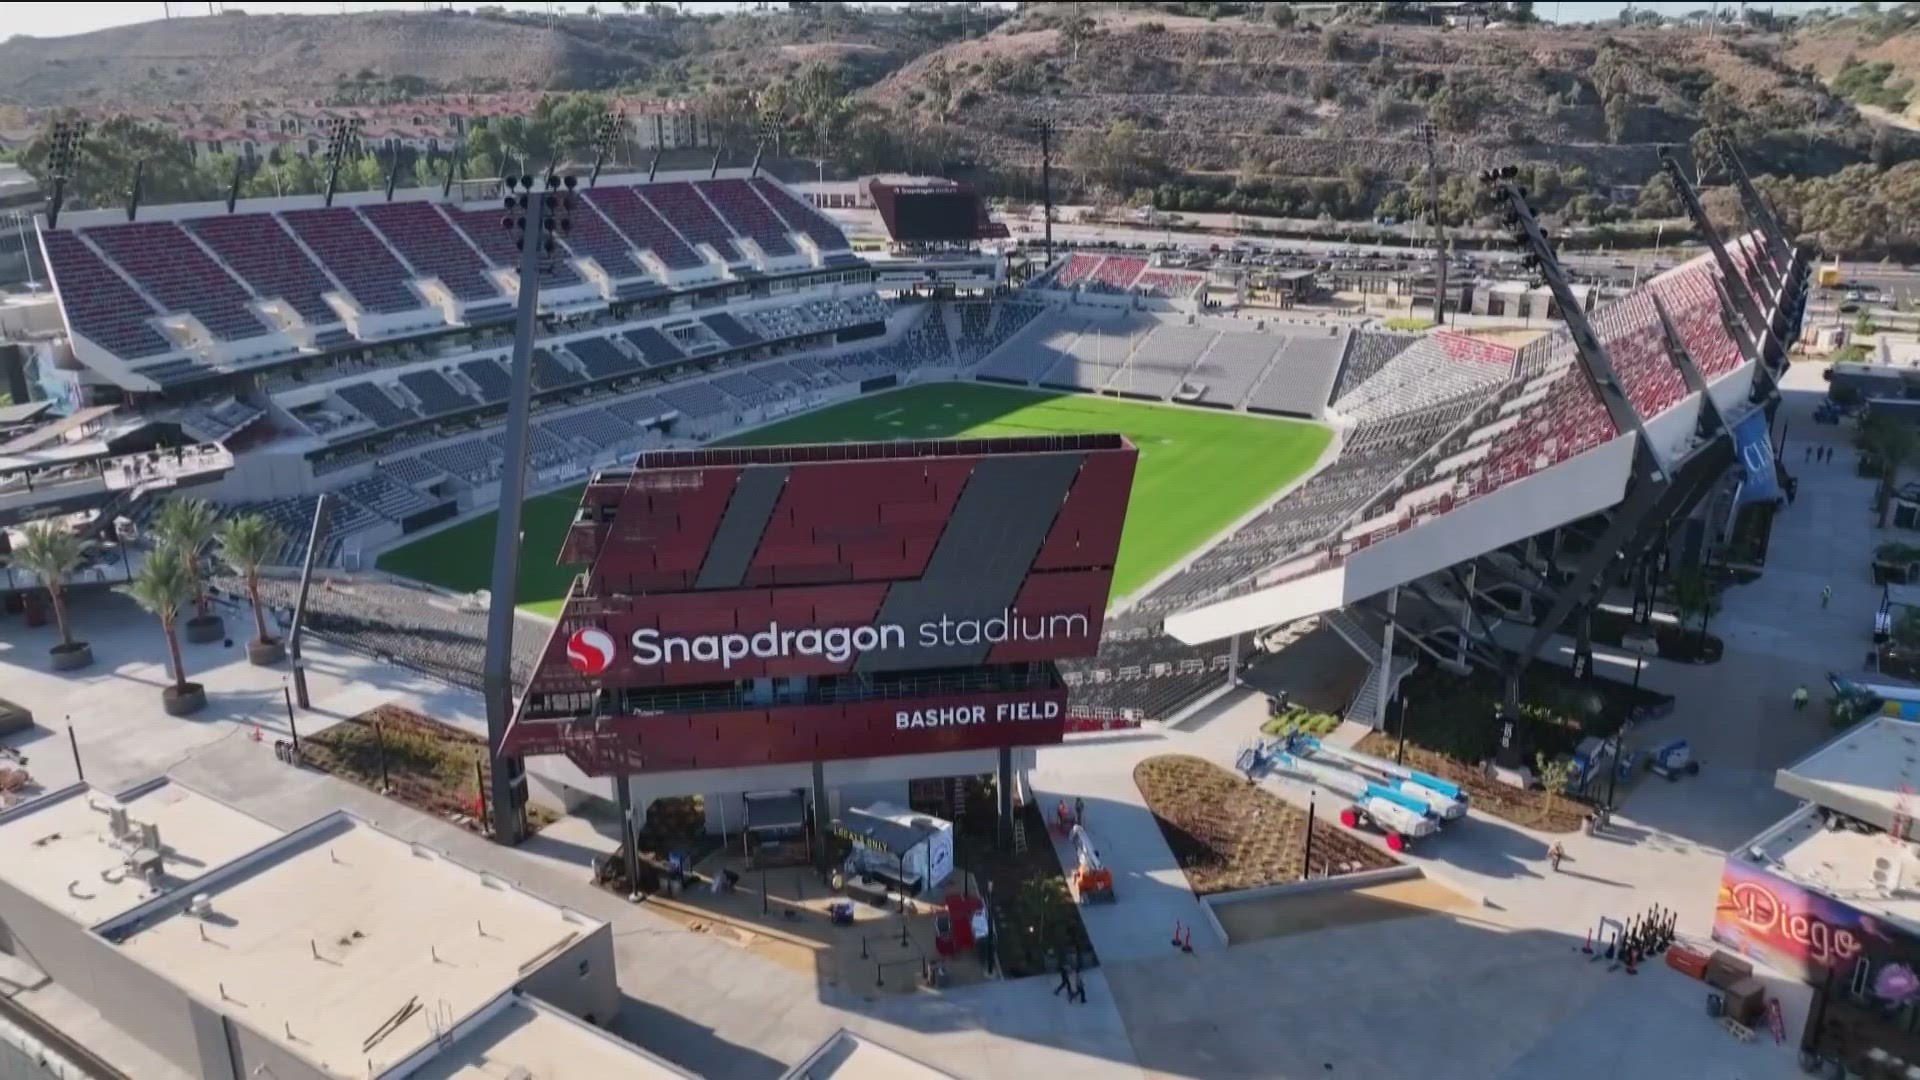 Snapdragon Stadium was announced as one of 15 host stadiums for the 2023 CONCACAF Gold Cup.